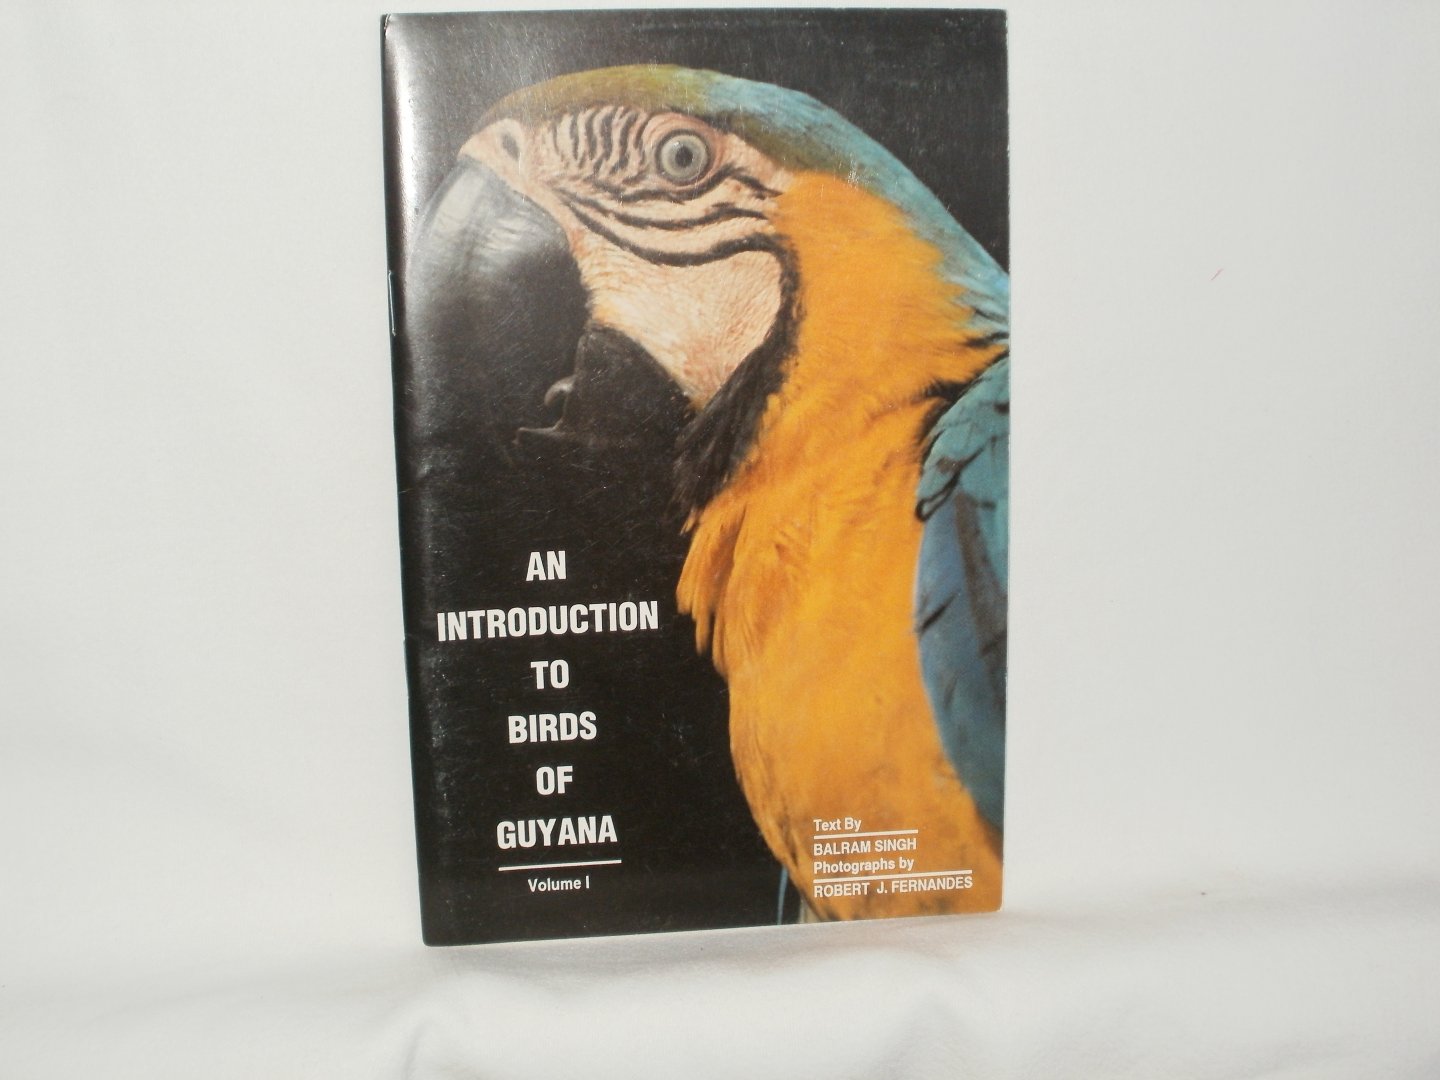 Singh, Balram - An introduction to Birds of Guyana, Volume 1, Guyana in Colour Series.